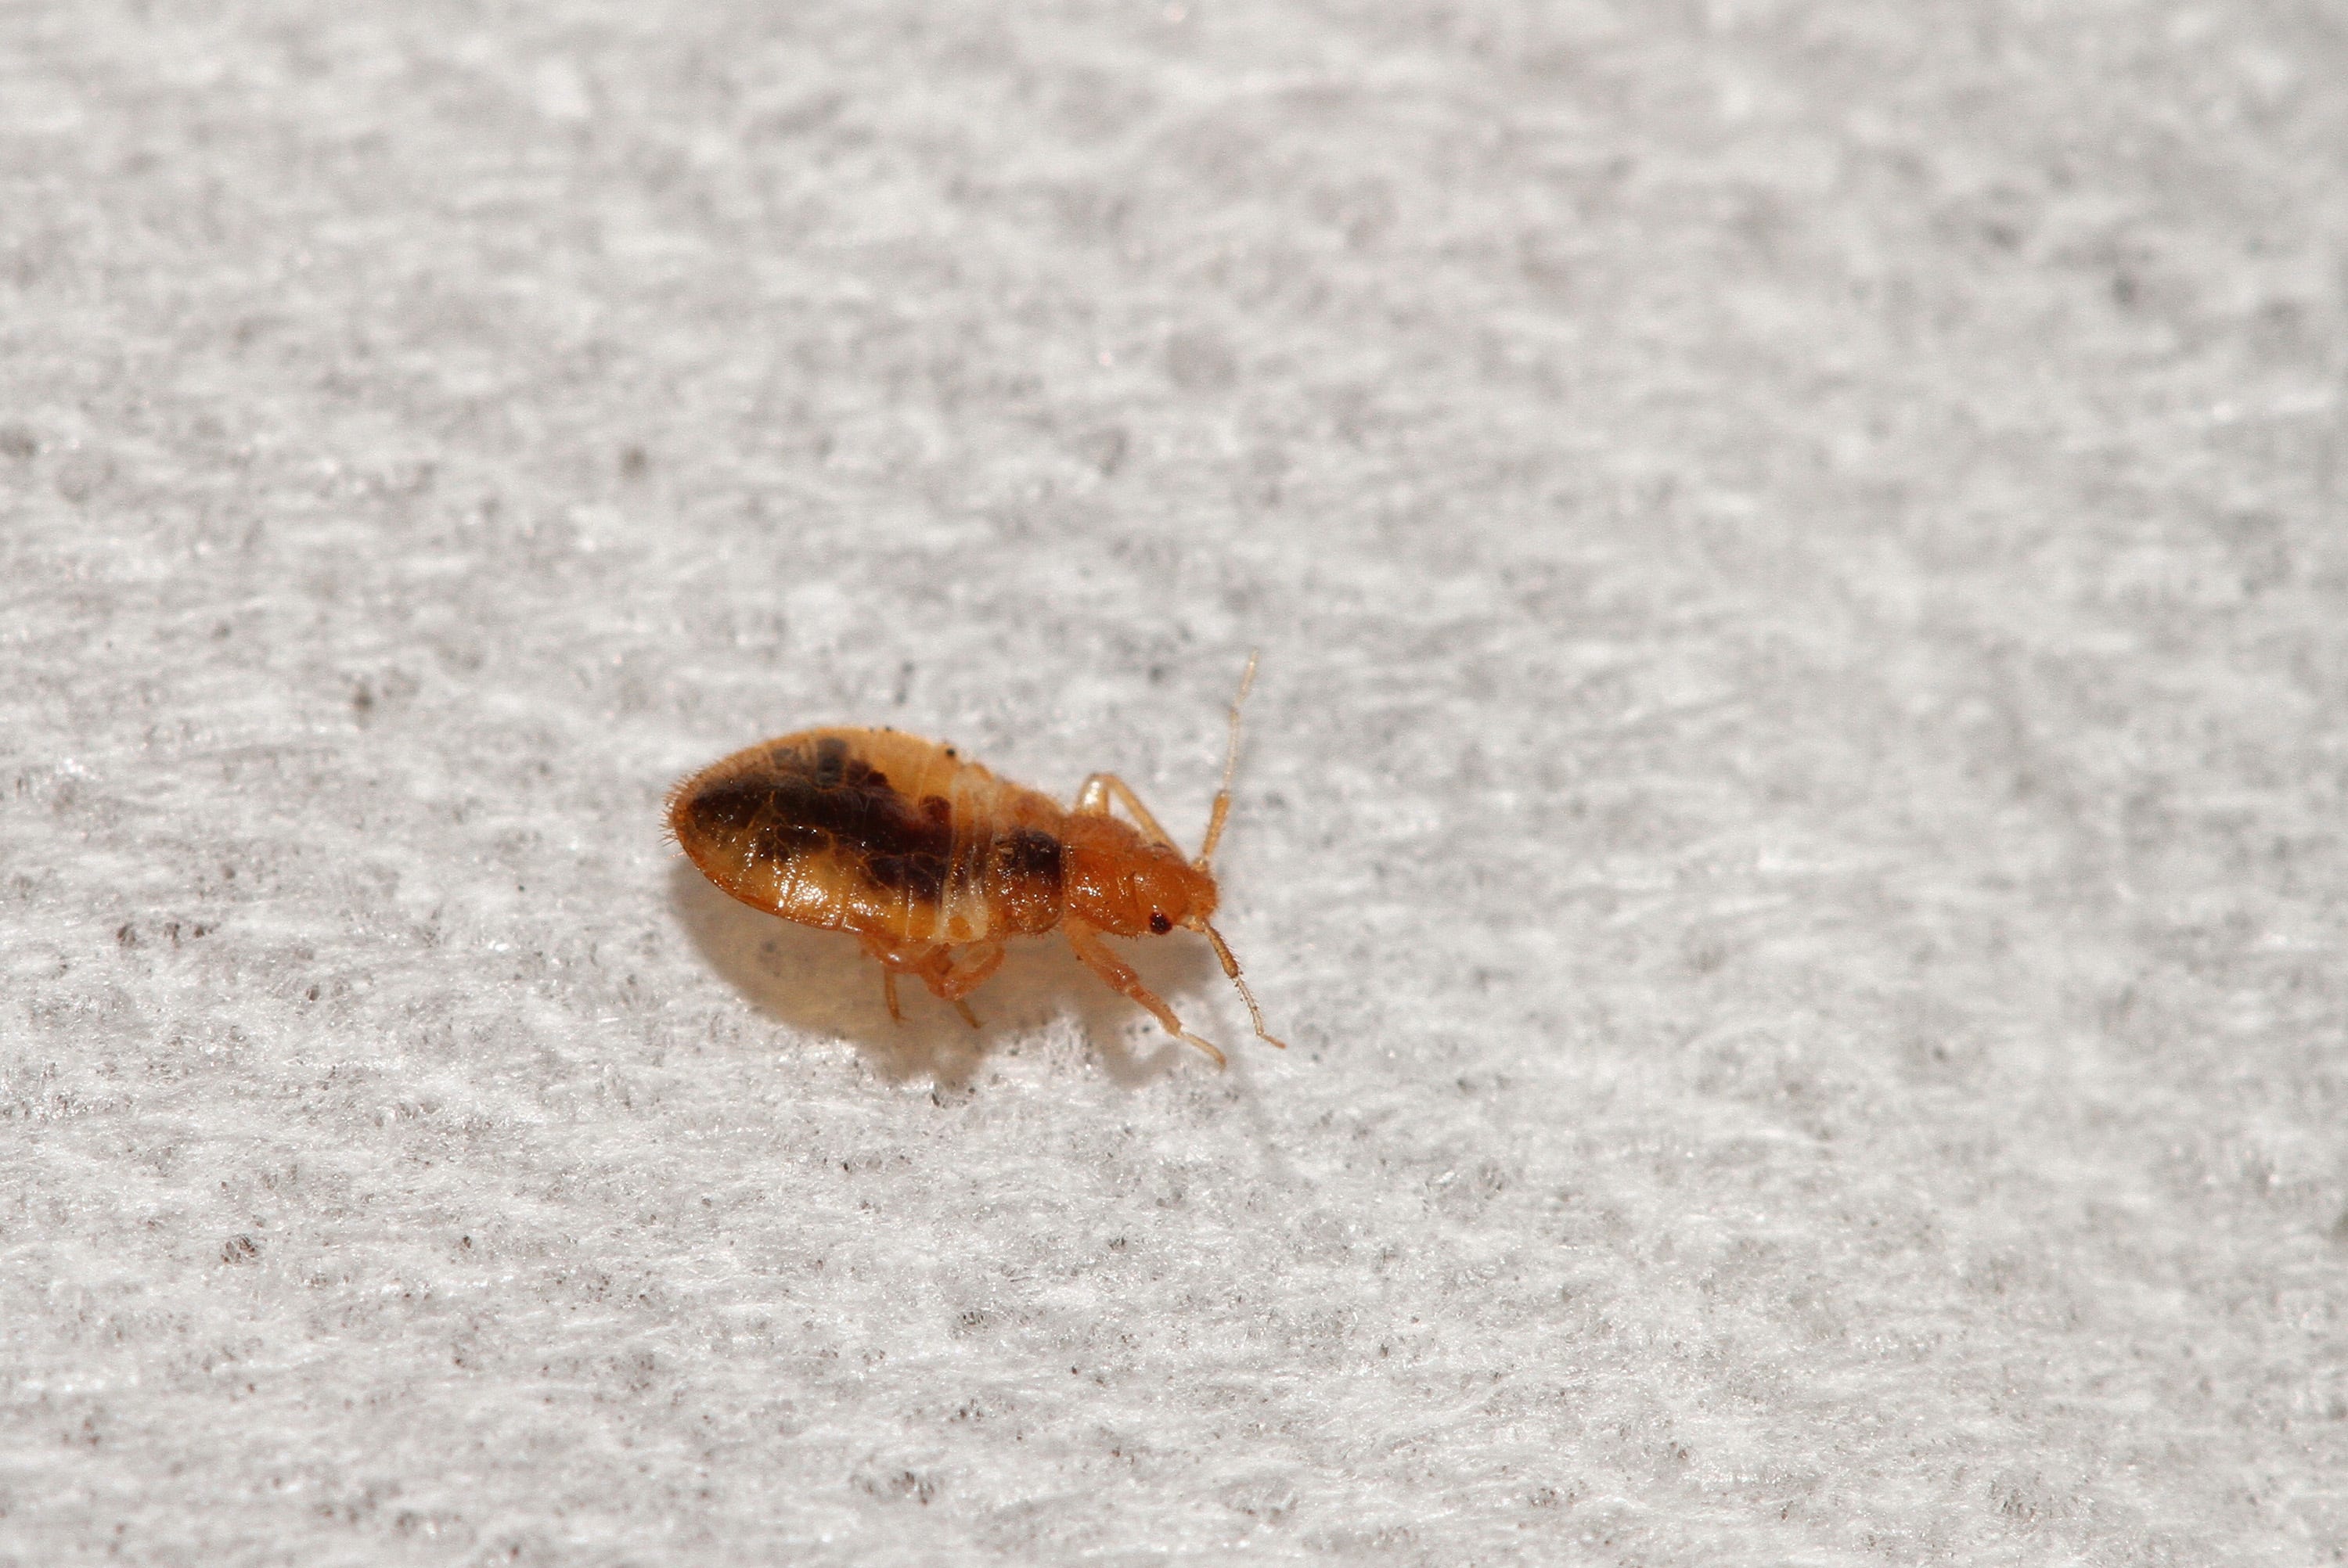 Dealing with bed bugs